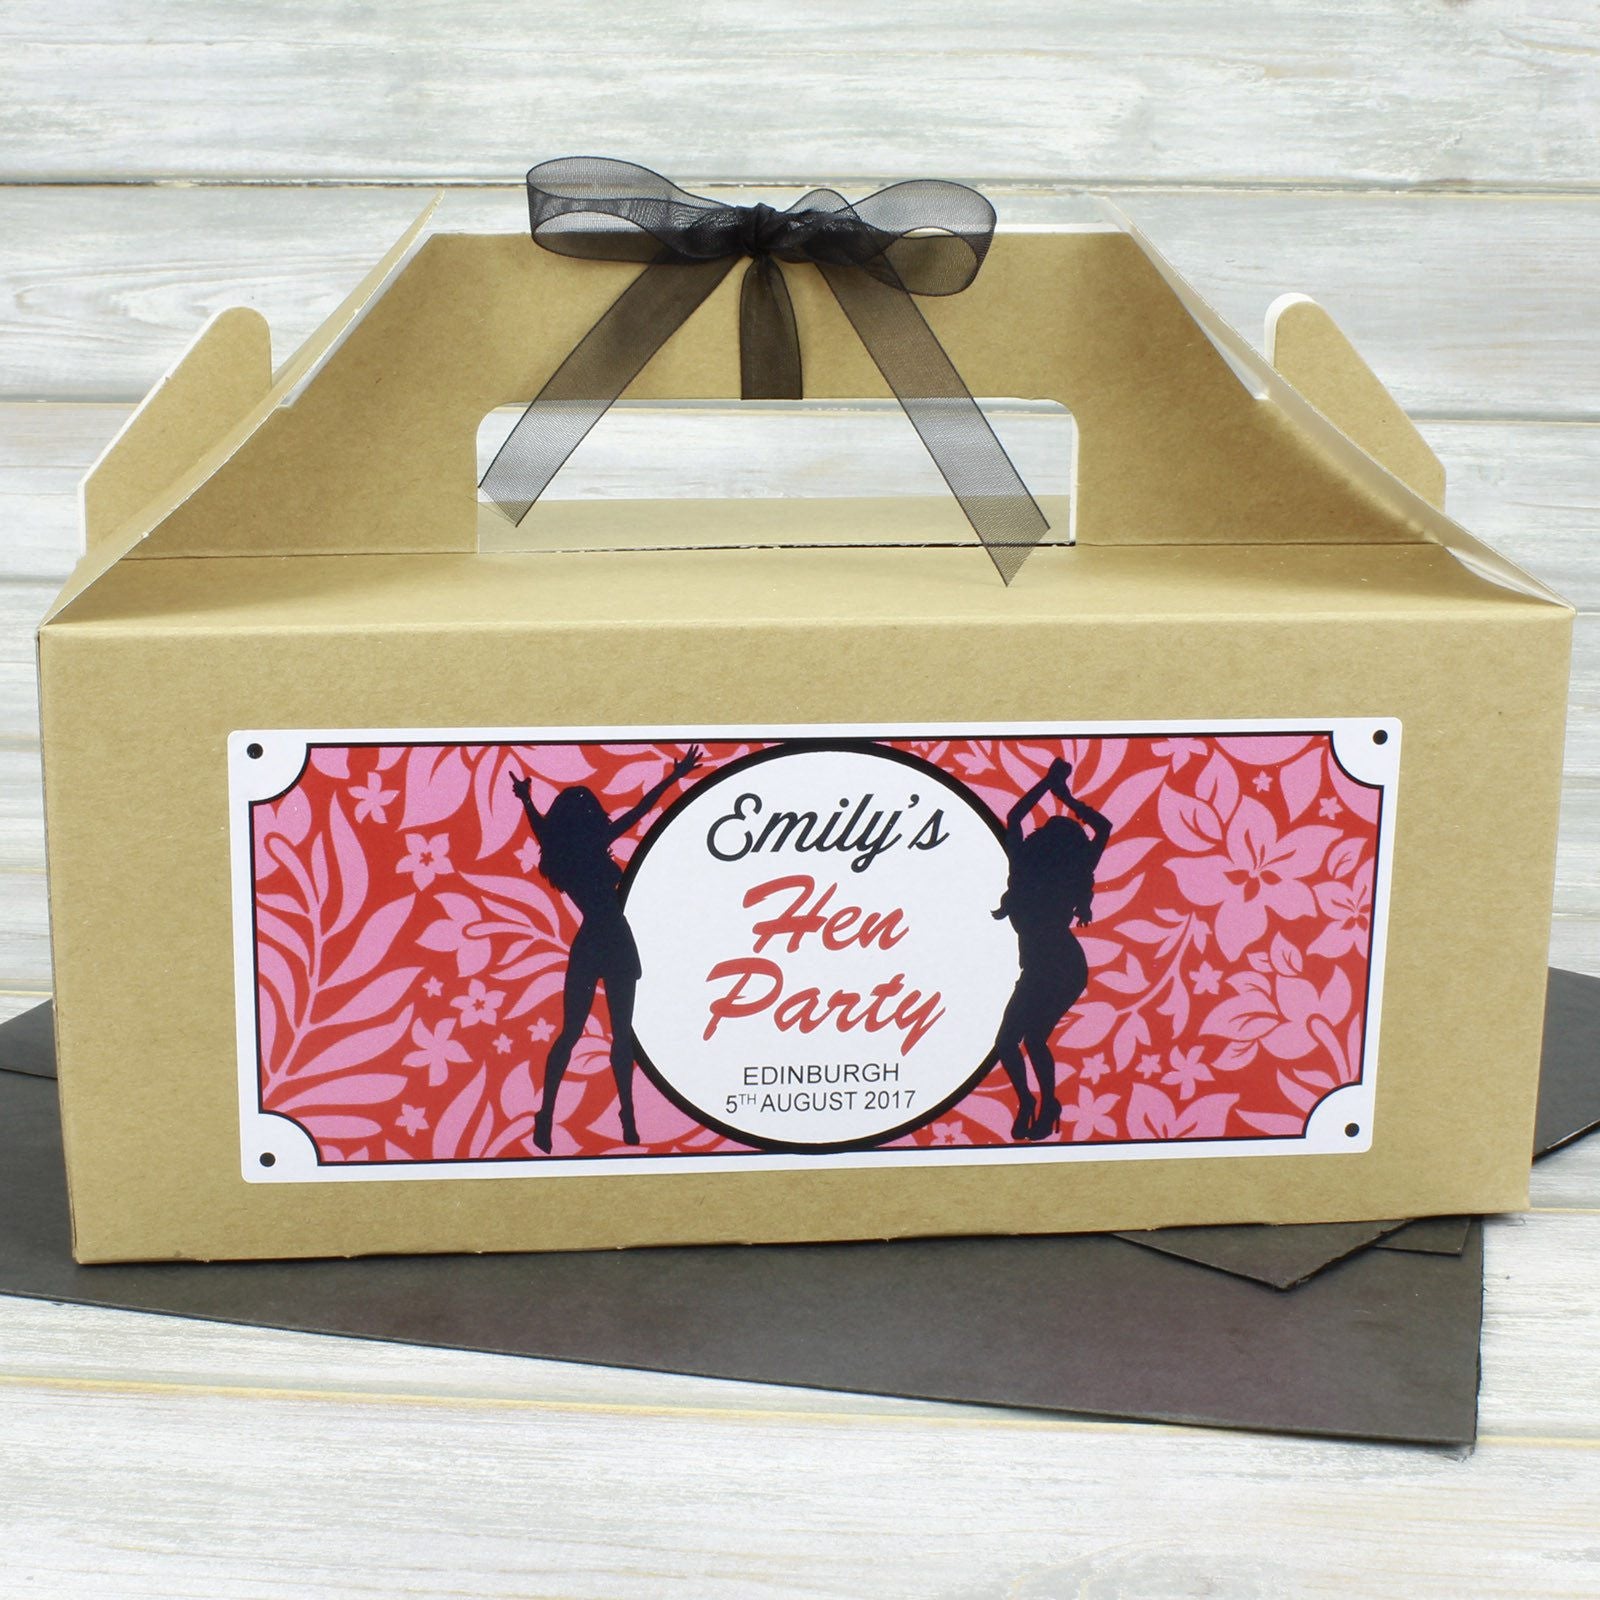 Hen Party Box - Personalised Hen Party Box Gift Favour (Empty) - Dancing Girls